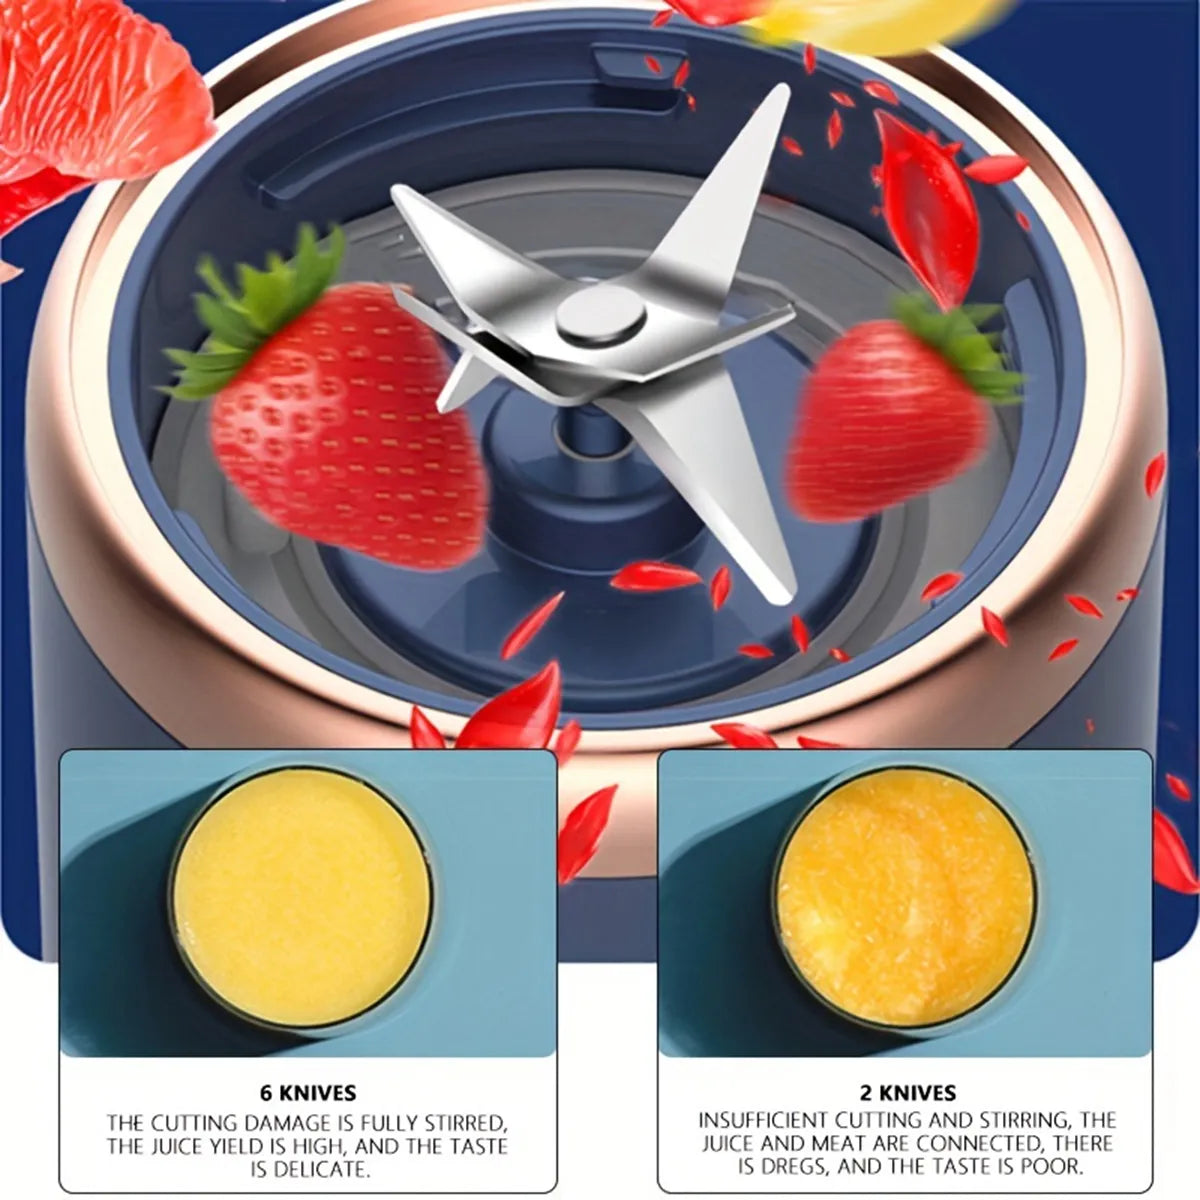 Close-up of the USB Electric Juicer Blender's hexa blade system, surrounded by strawberries. The six sharp blades ensure thorough blending, perfect for making fruit smoothies and baby food with ease.